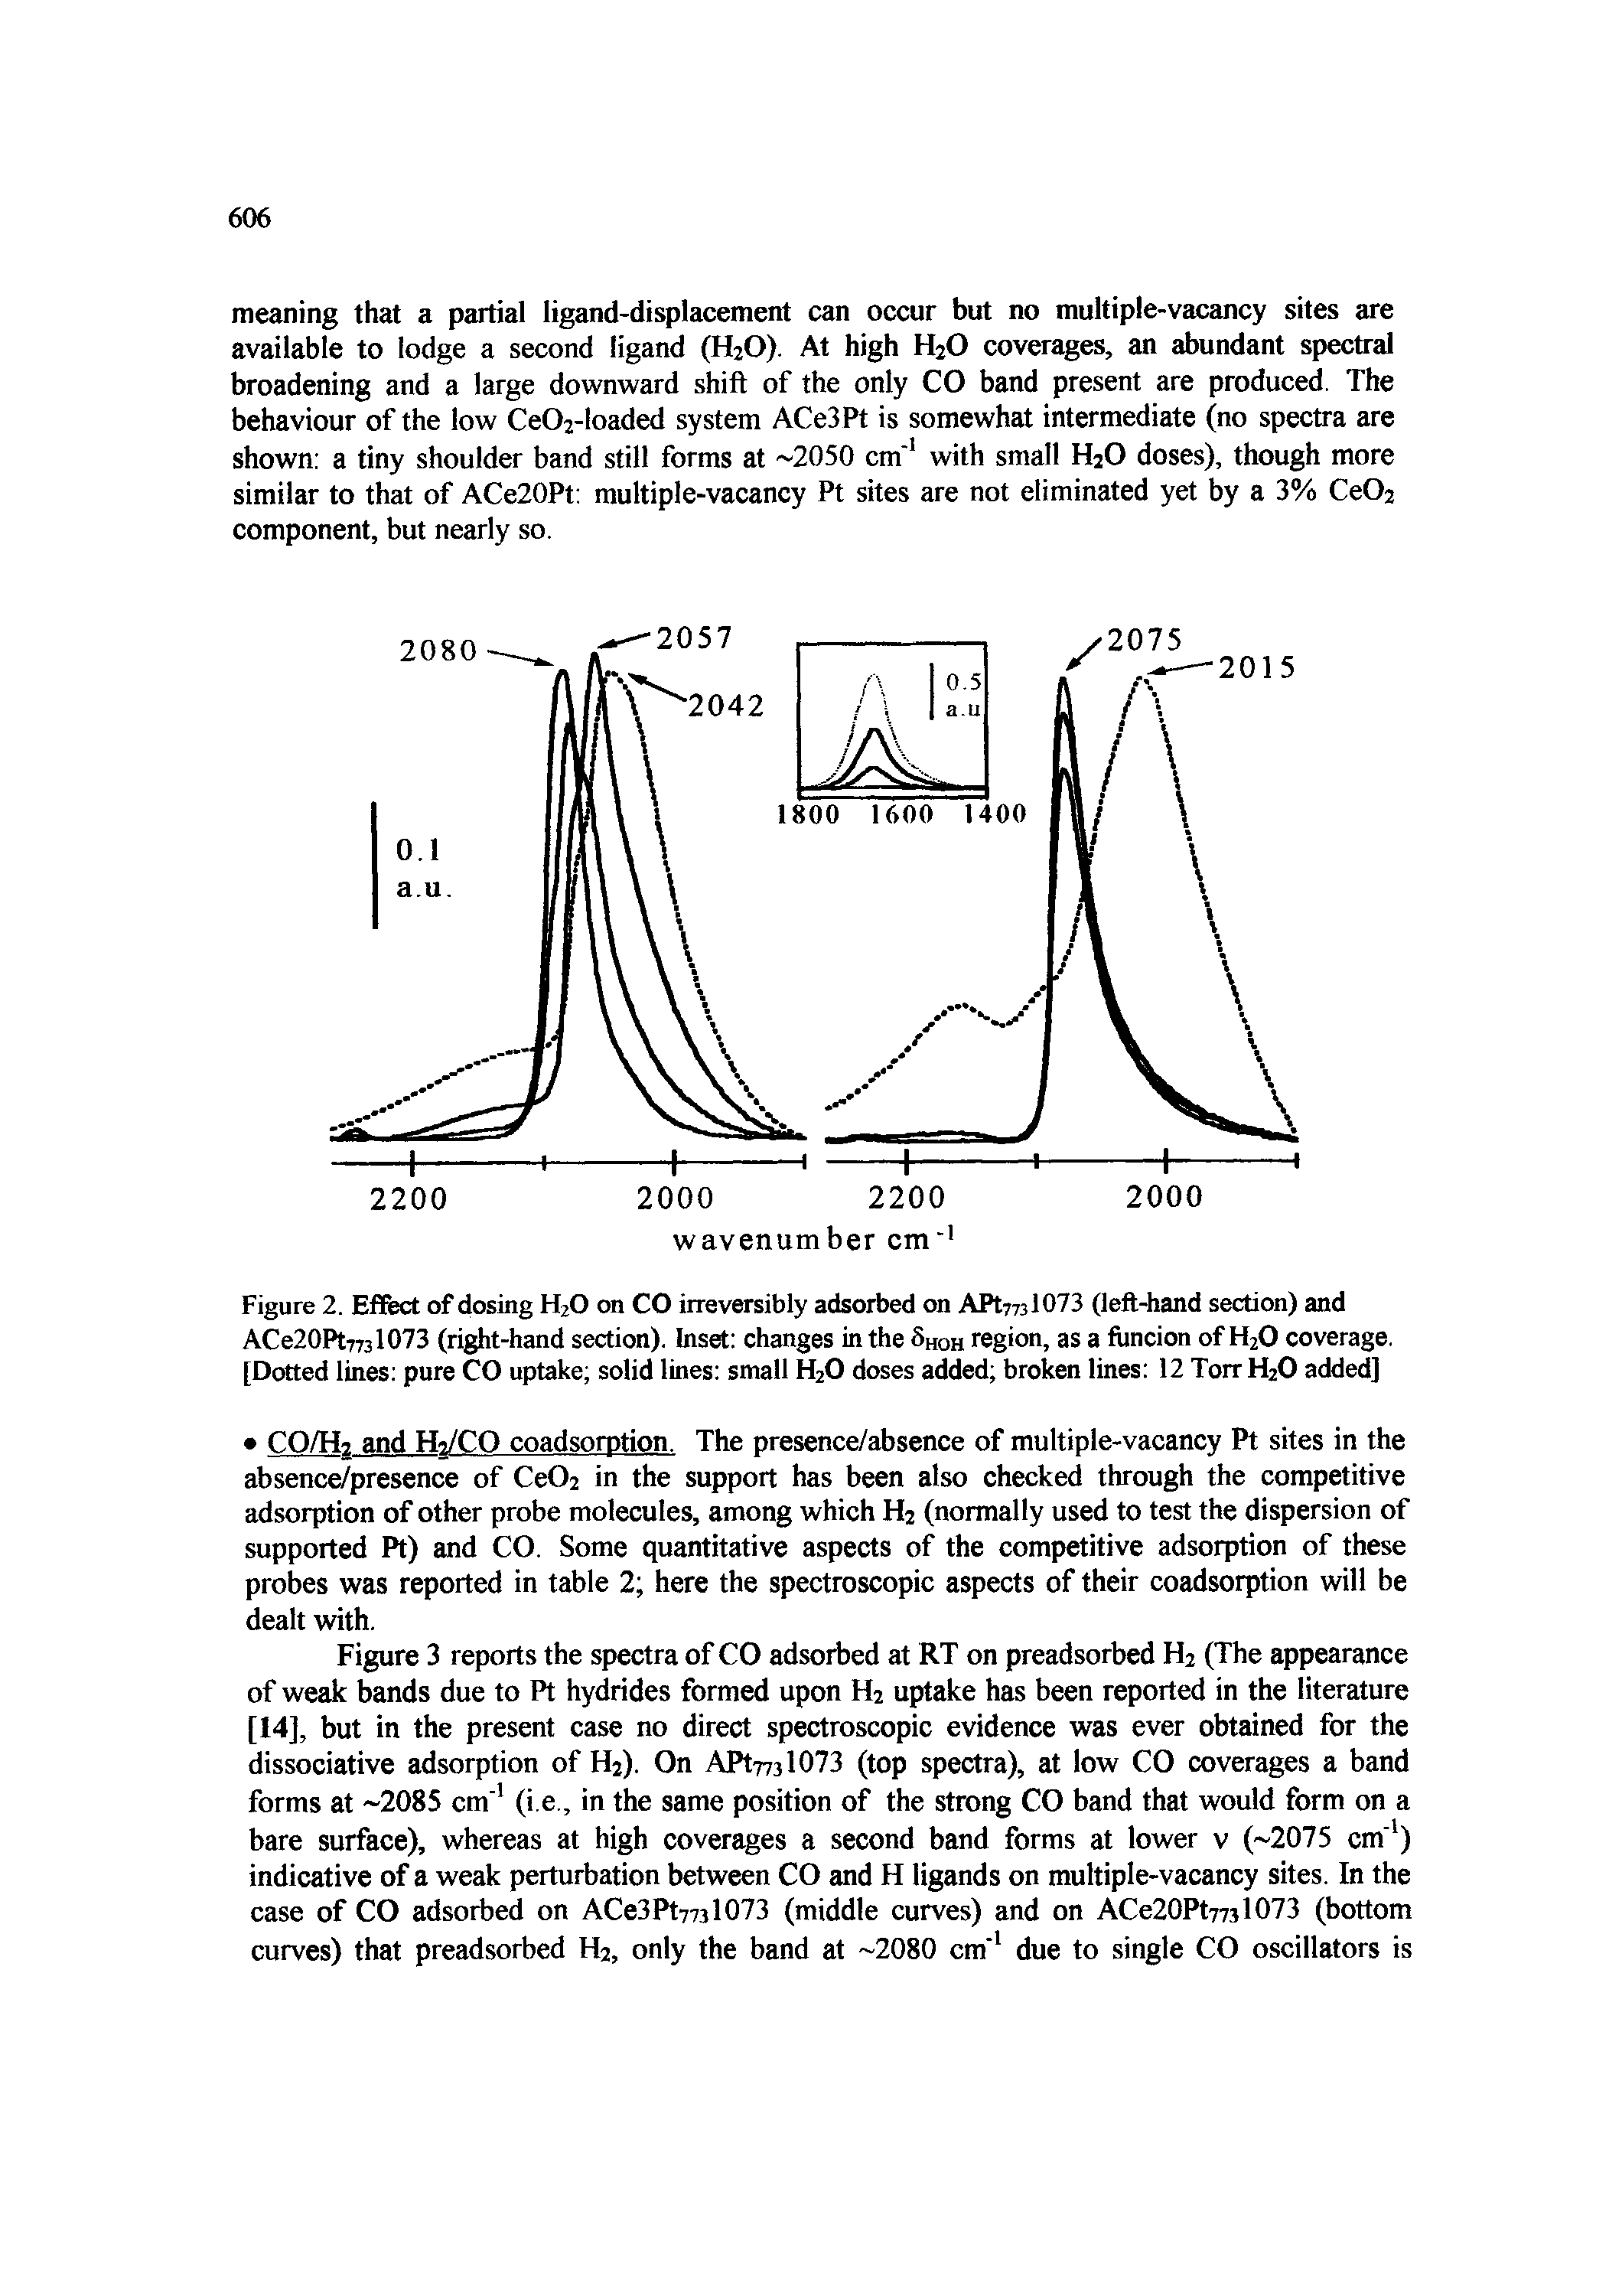 Figure 2. Effect of dosing H2O on CO irreversibly adsorbed on APt773 l073 (left-hand section) and ACe20Pt773l073 (right-hand section). Inset changes in the Shoh region, as a funcion of H2O coverage. [Dotted lines pure CO uptake solid lines small H2O doses added broken lines 12 T01TH2O added]...